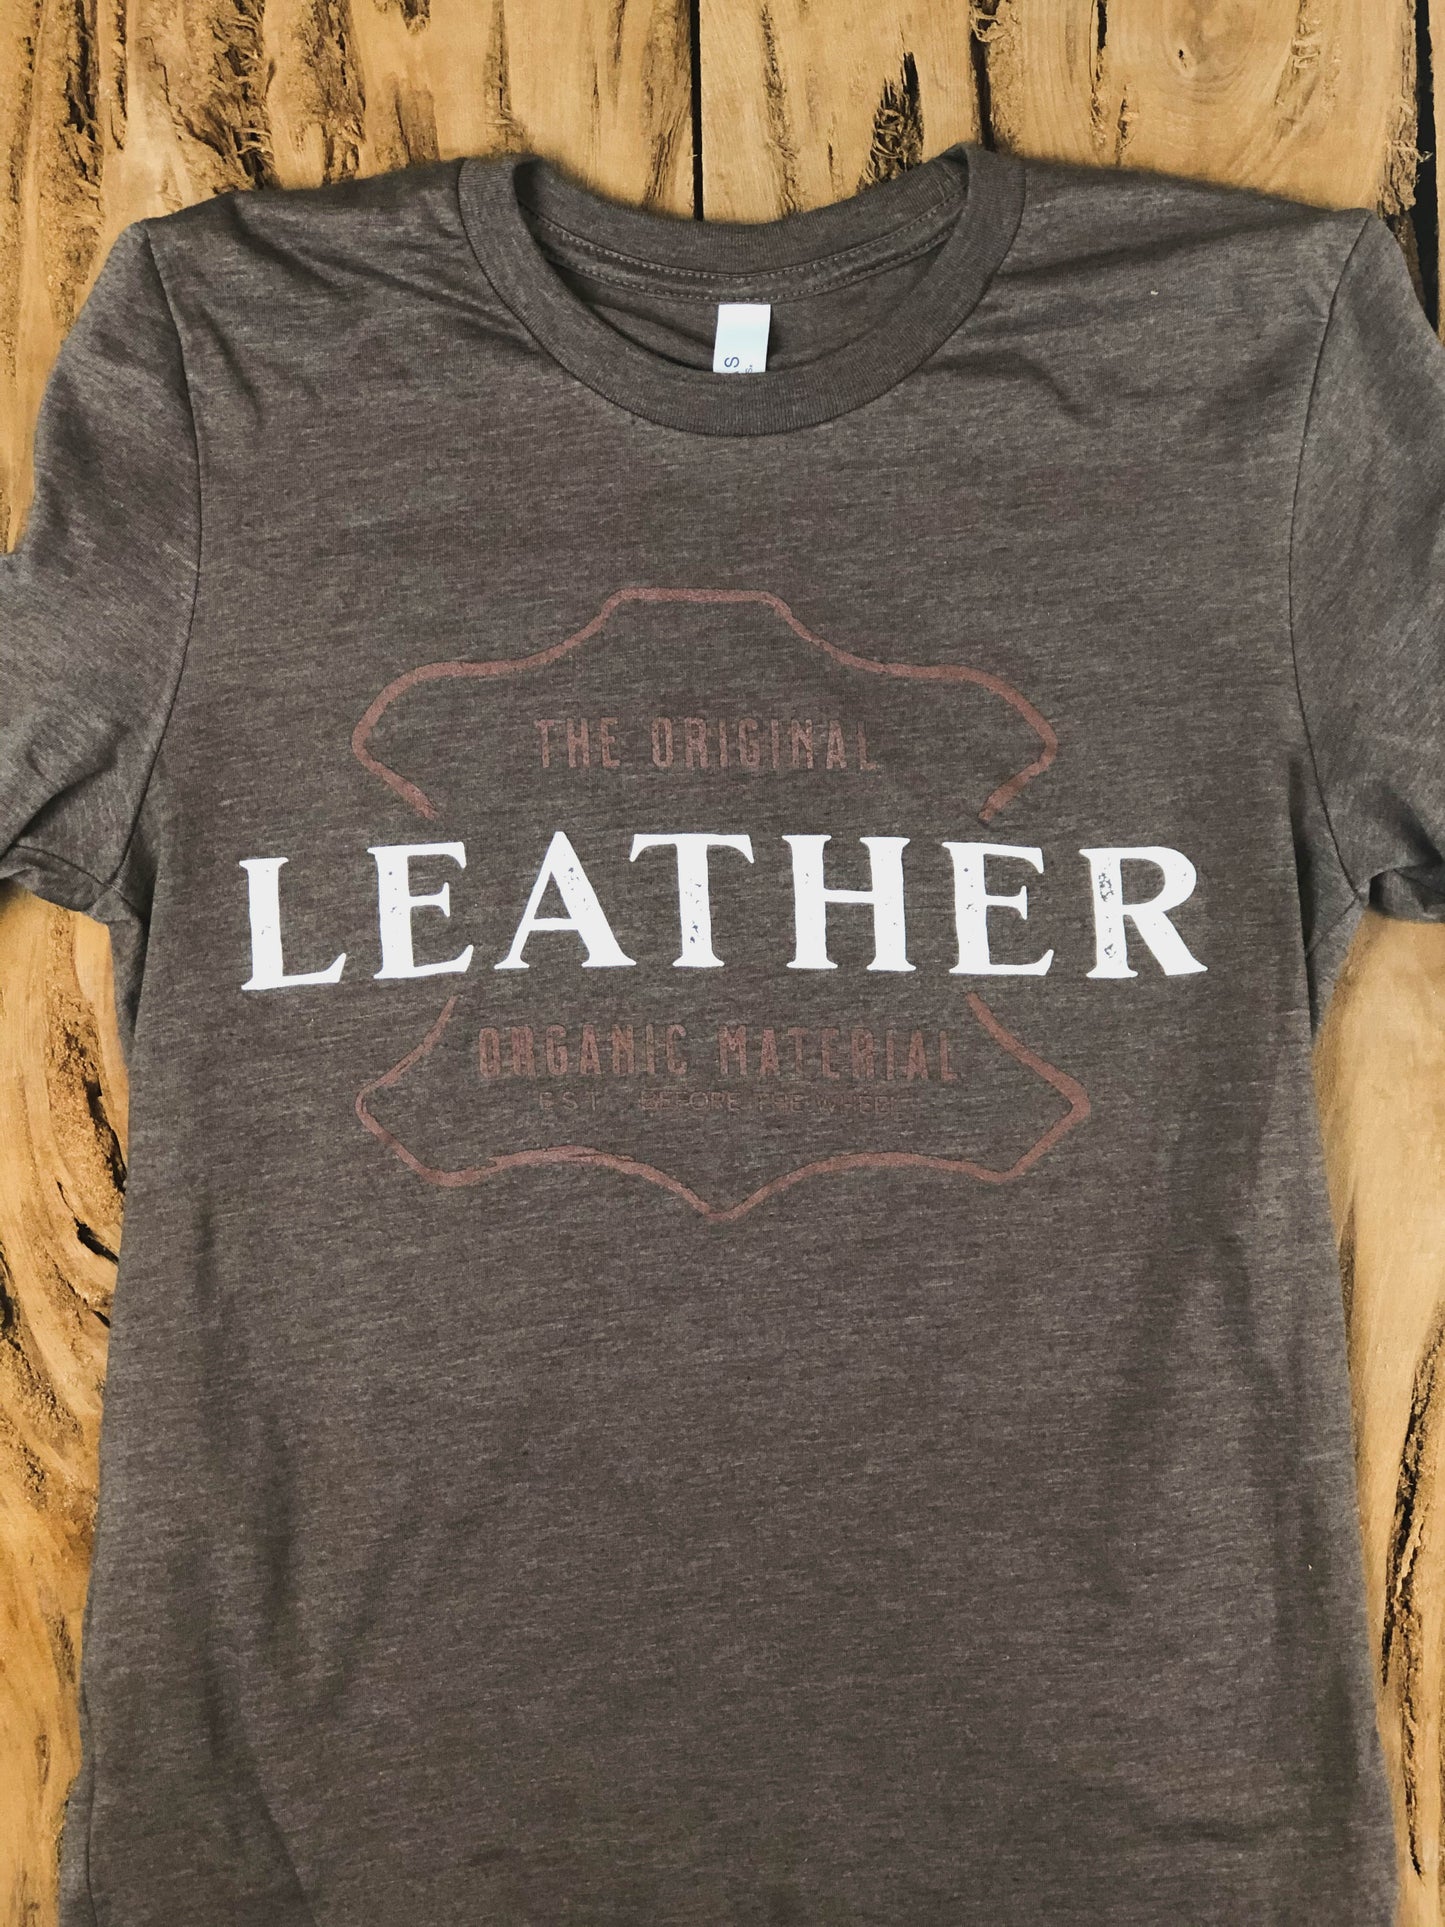 DG LeatherCraft "Leather" Graphic T-Shirt -Brown